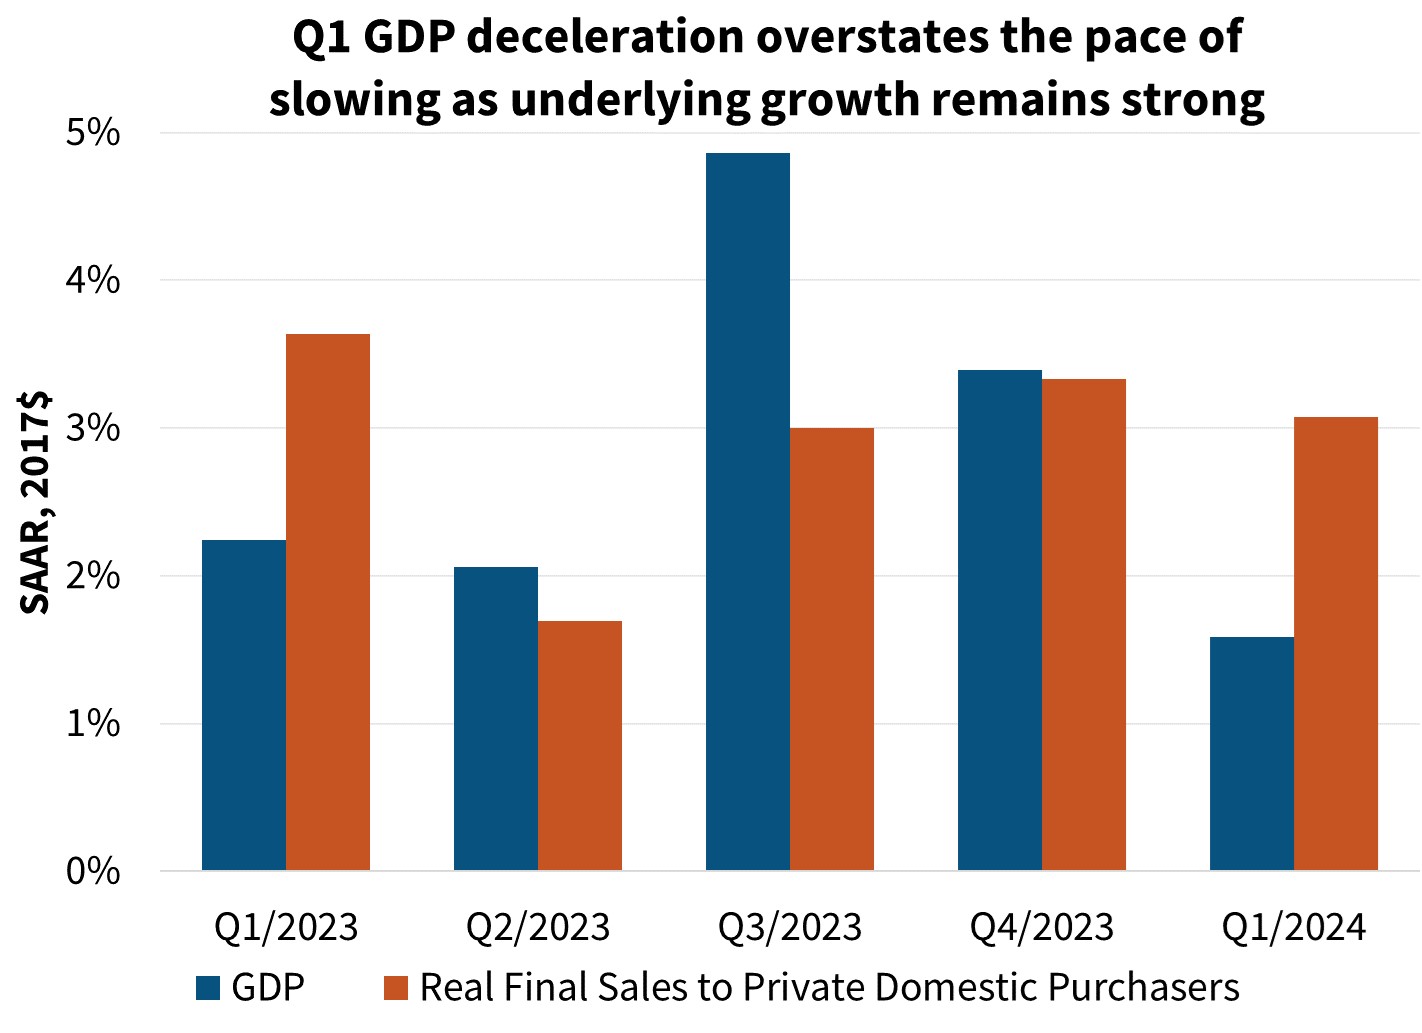 Q1 GDP deceleration overstates the pace of slowing as underlying growth remained strong